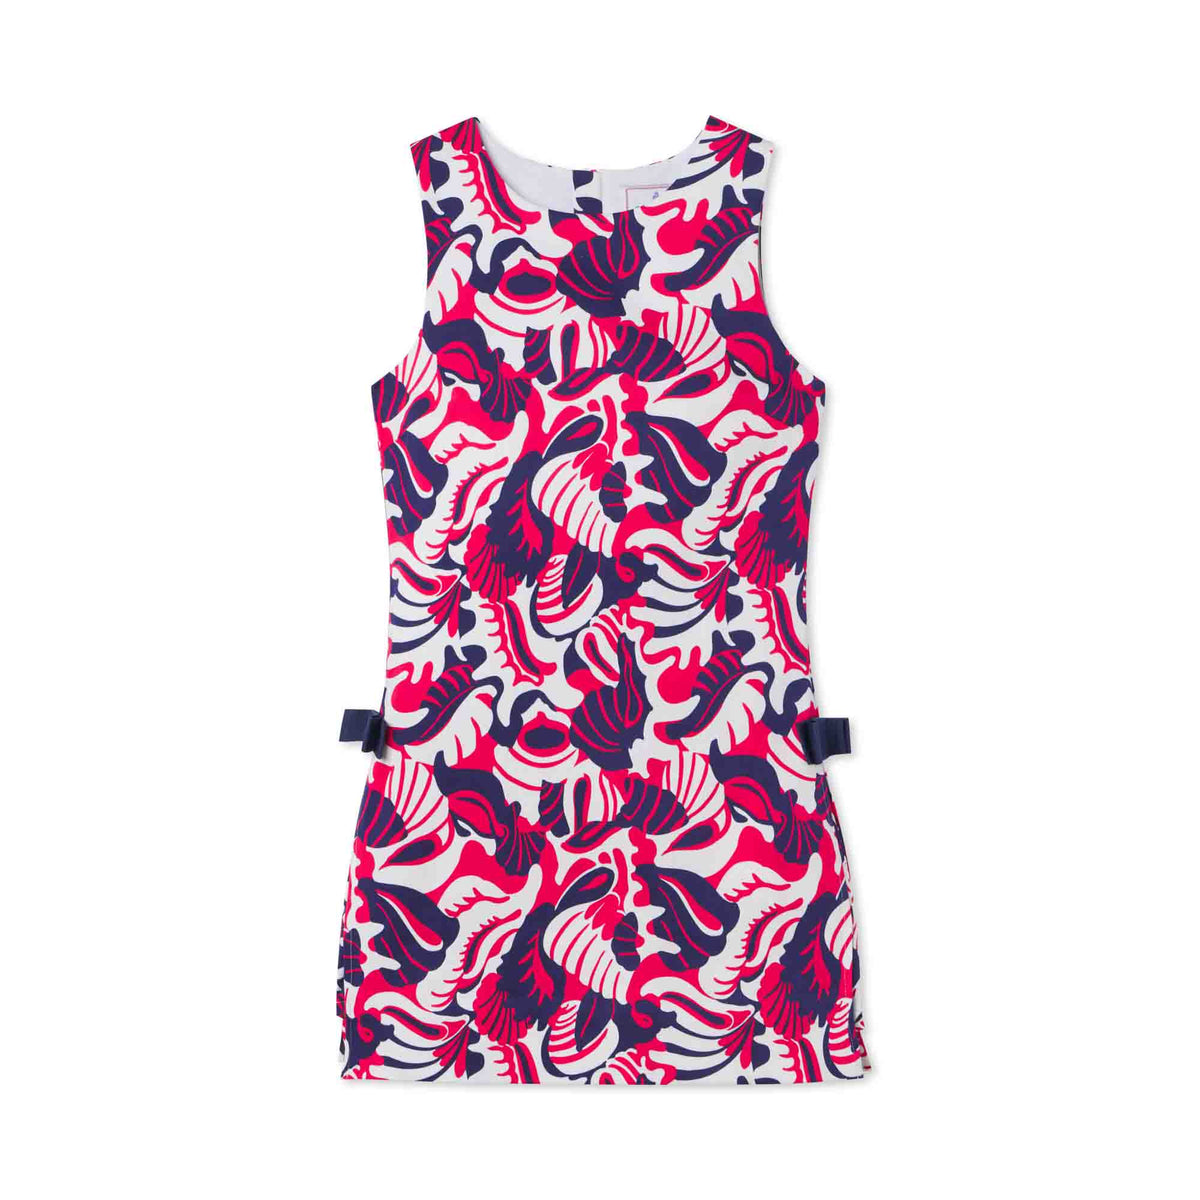 Classic and Preppy Madison Romper, Roton Point Print-Dresses, Jumpsuits and Rompers-Roton Point Print-2T-CPC - Classic Prep Childrenswear